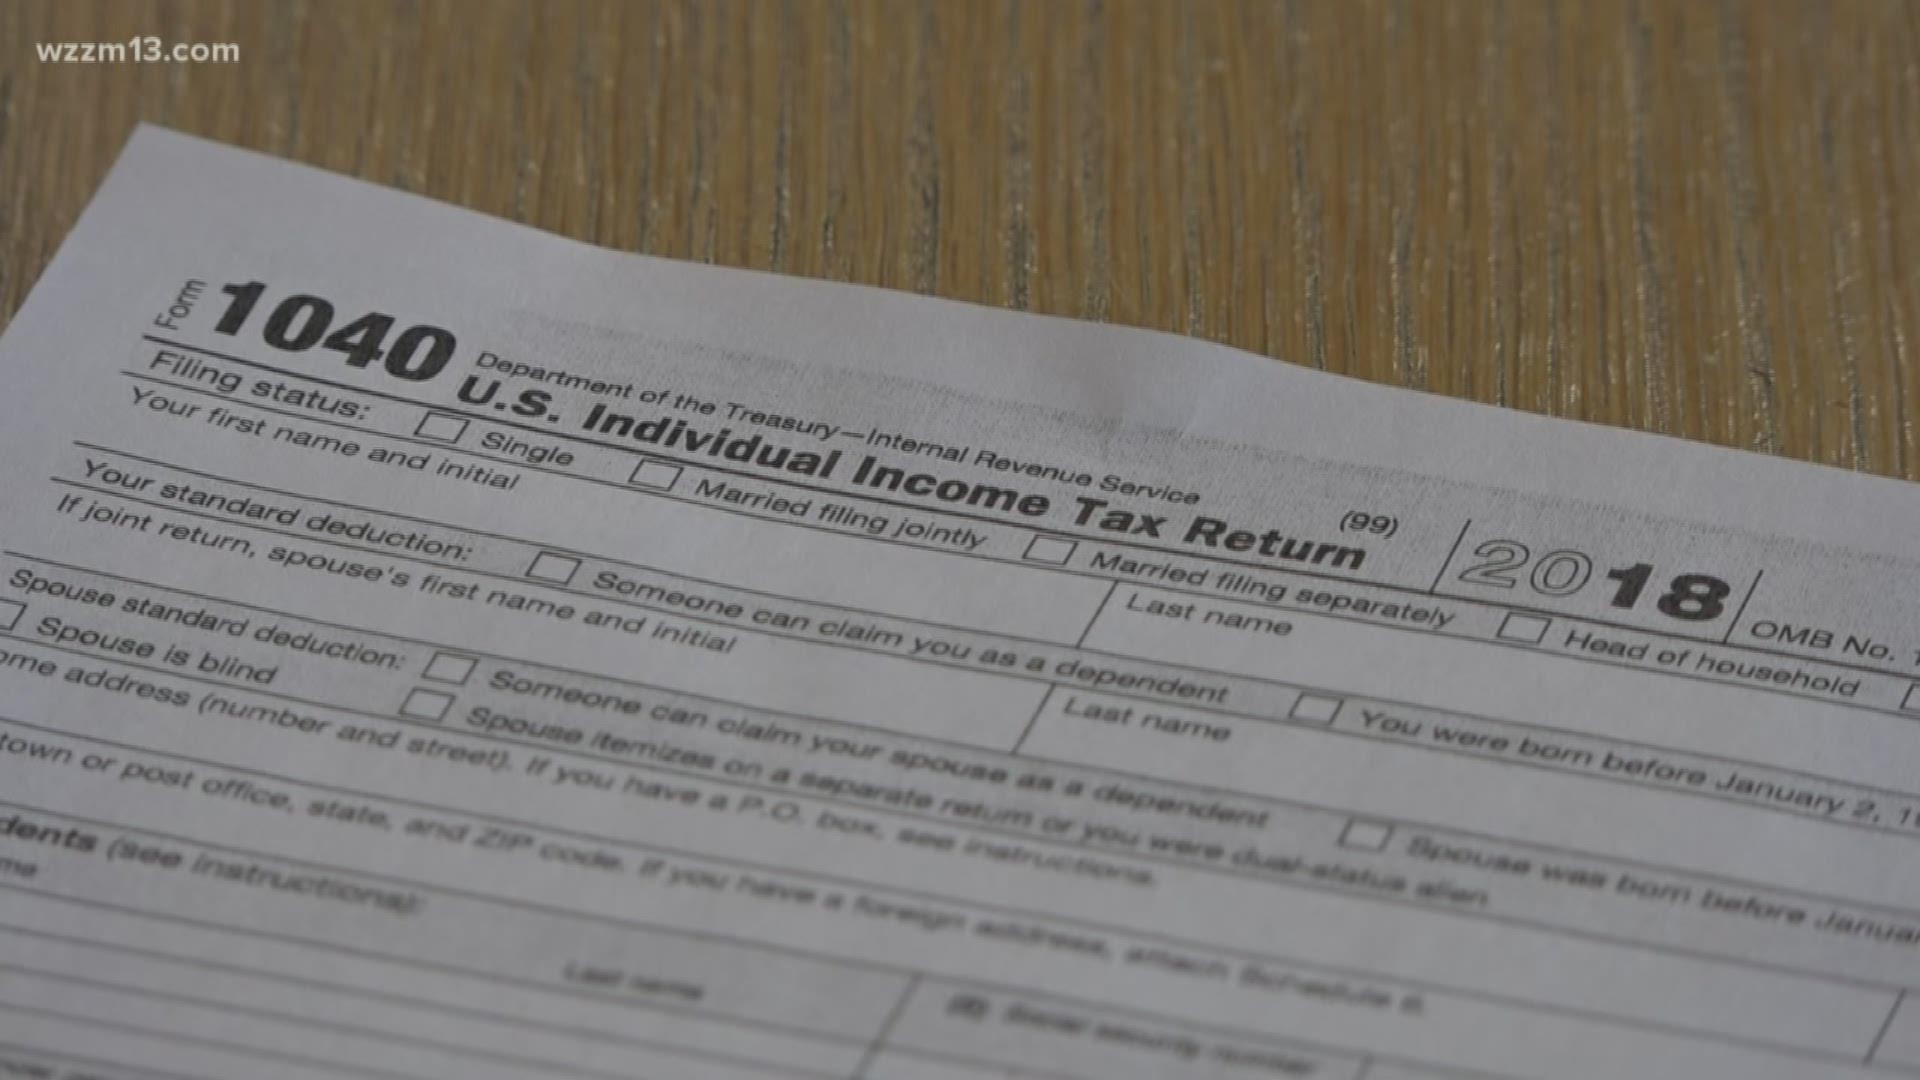 Changes with new federal tax forms